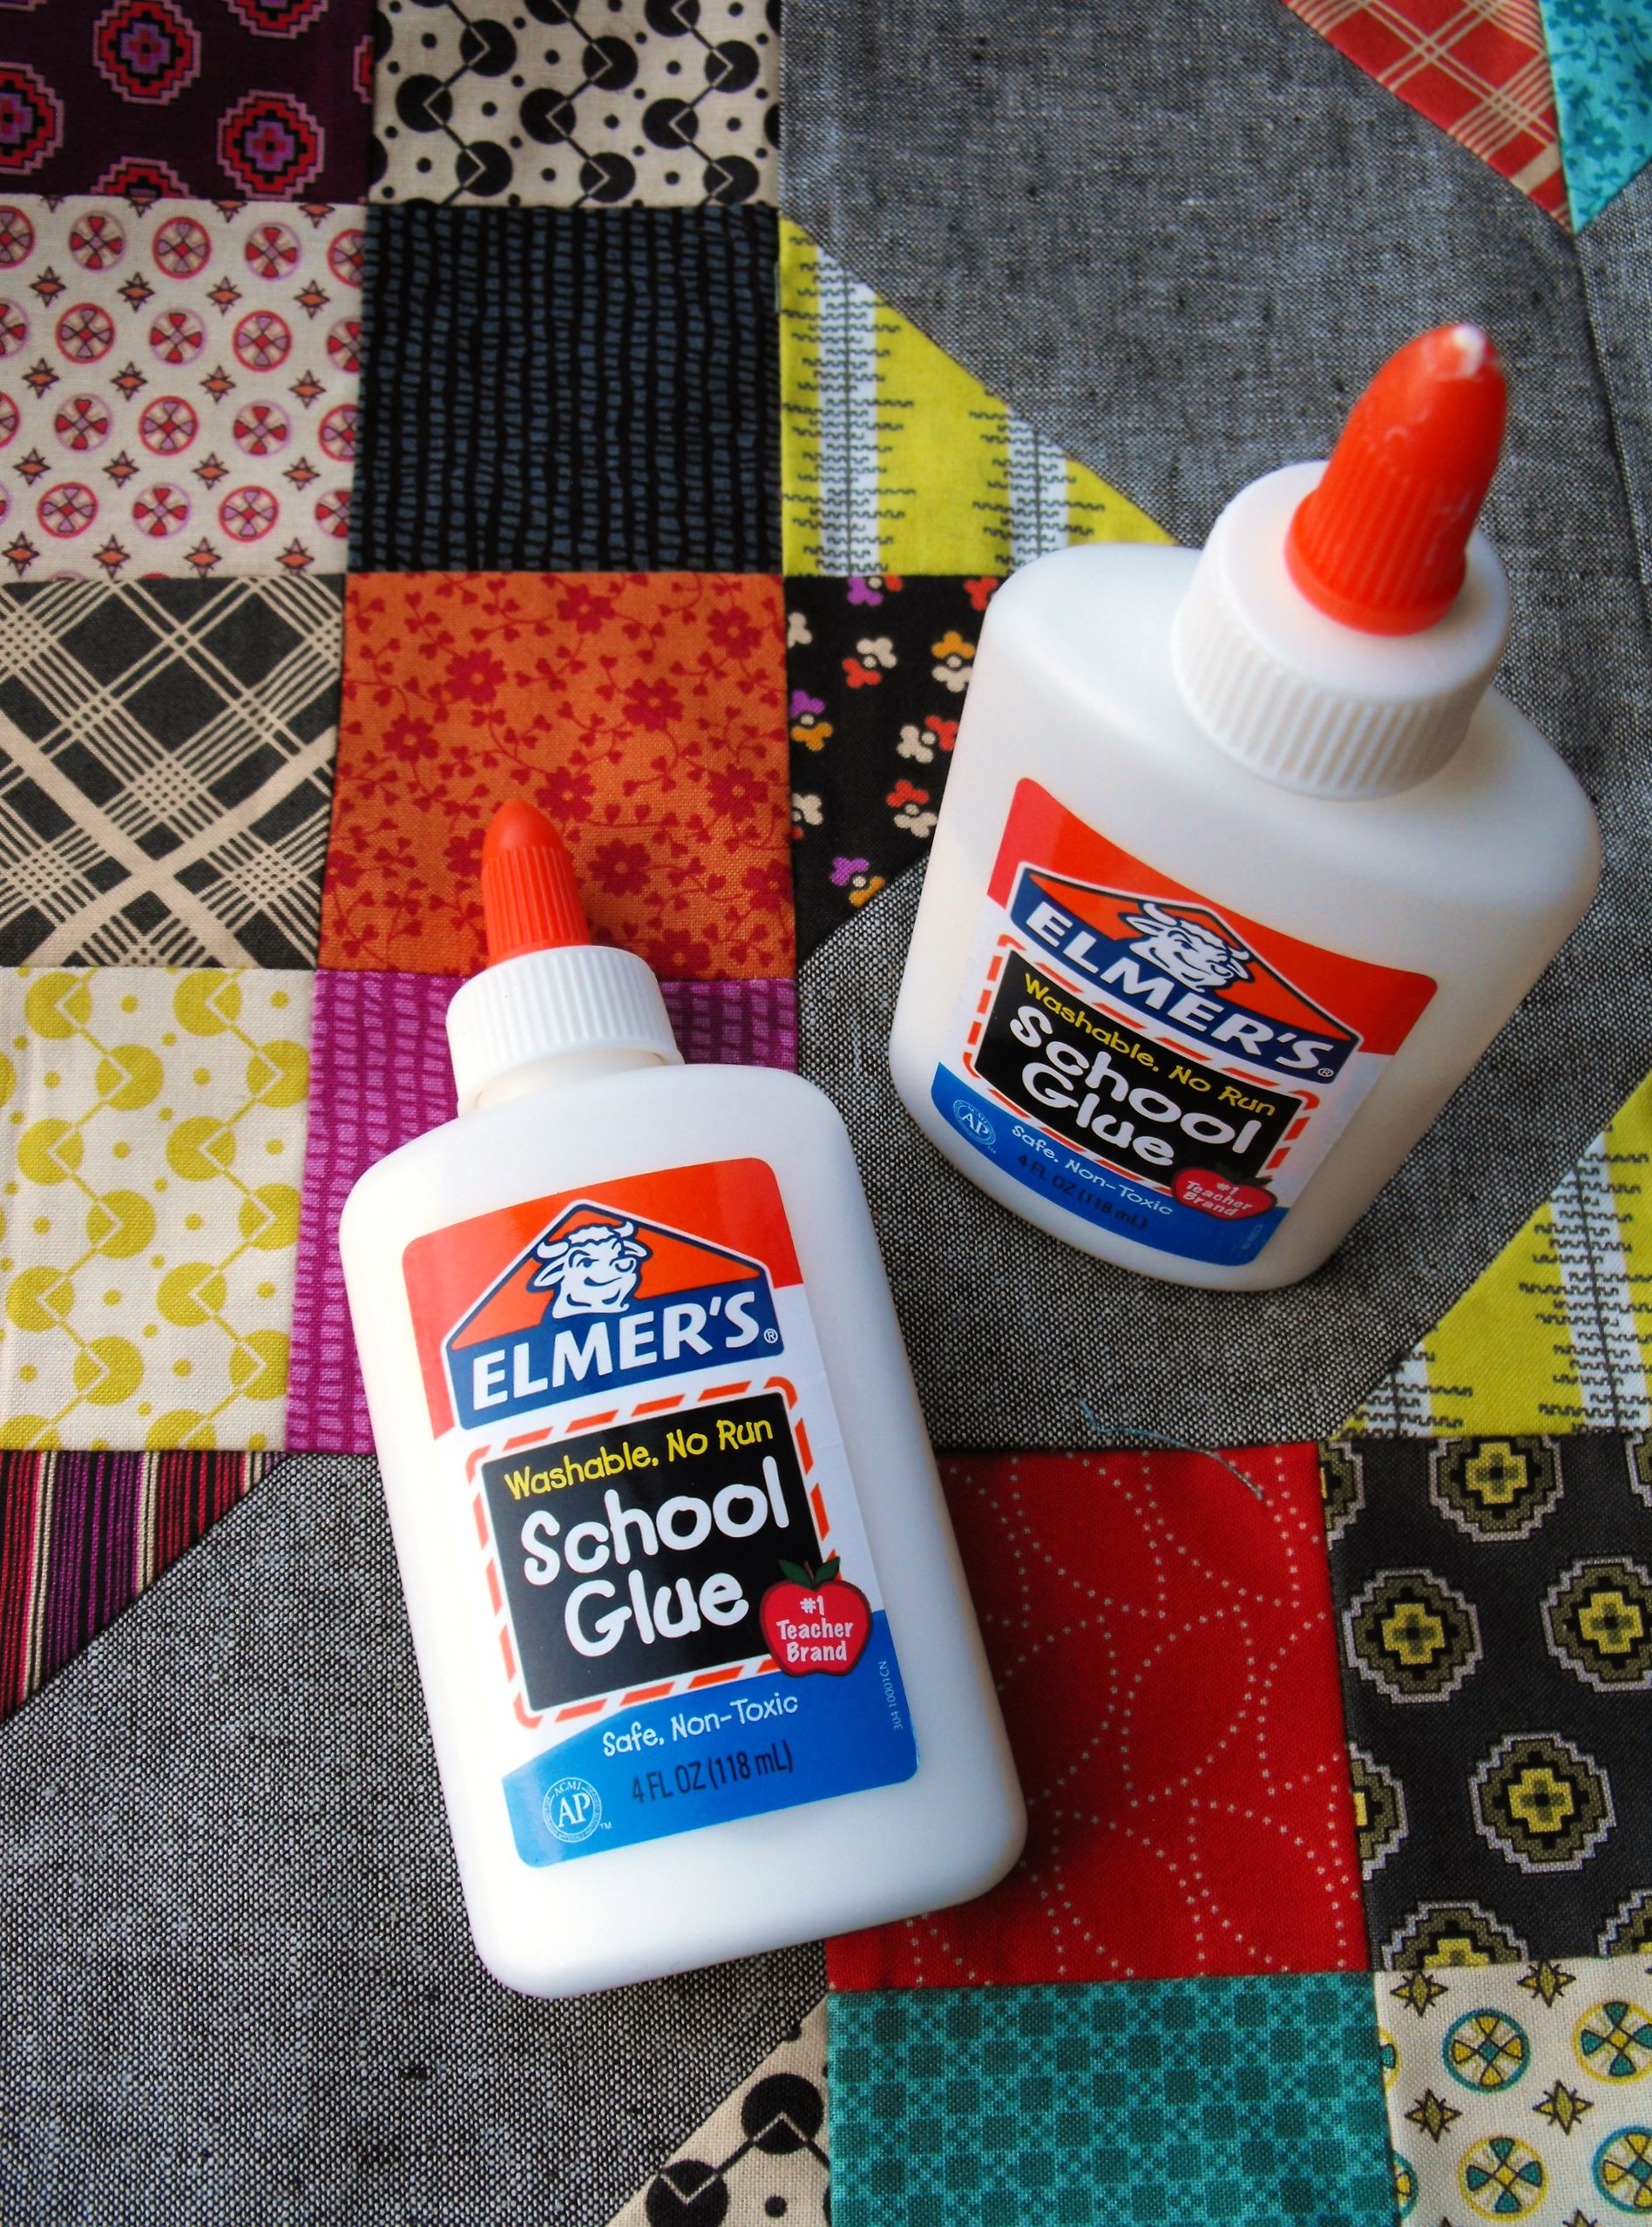 Elmer's Glue Bottles - How to Use Glue in Quilting